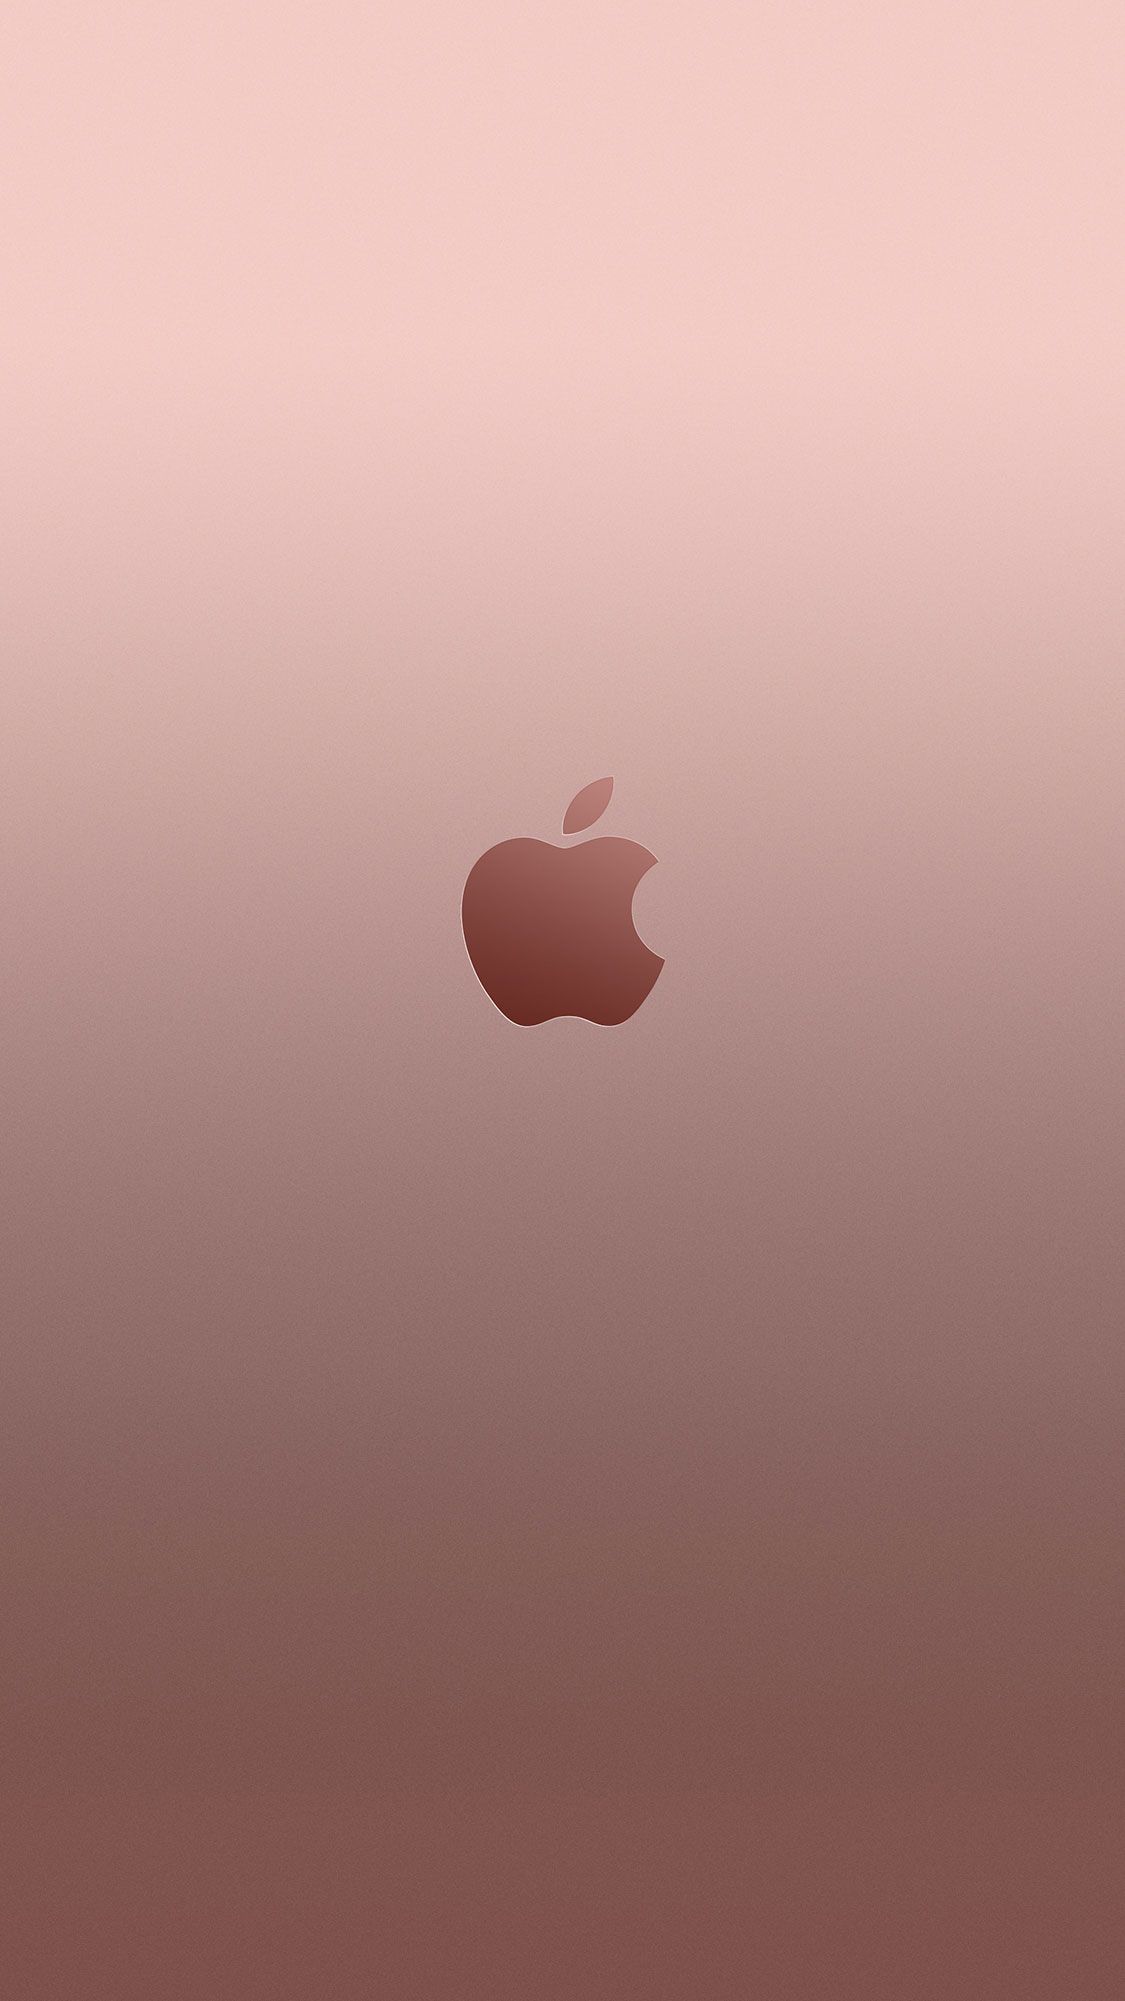 20 New iPhone 6 & 6S Wallpapers & Backgrounds in HD Quality